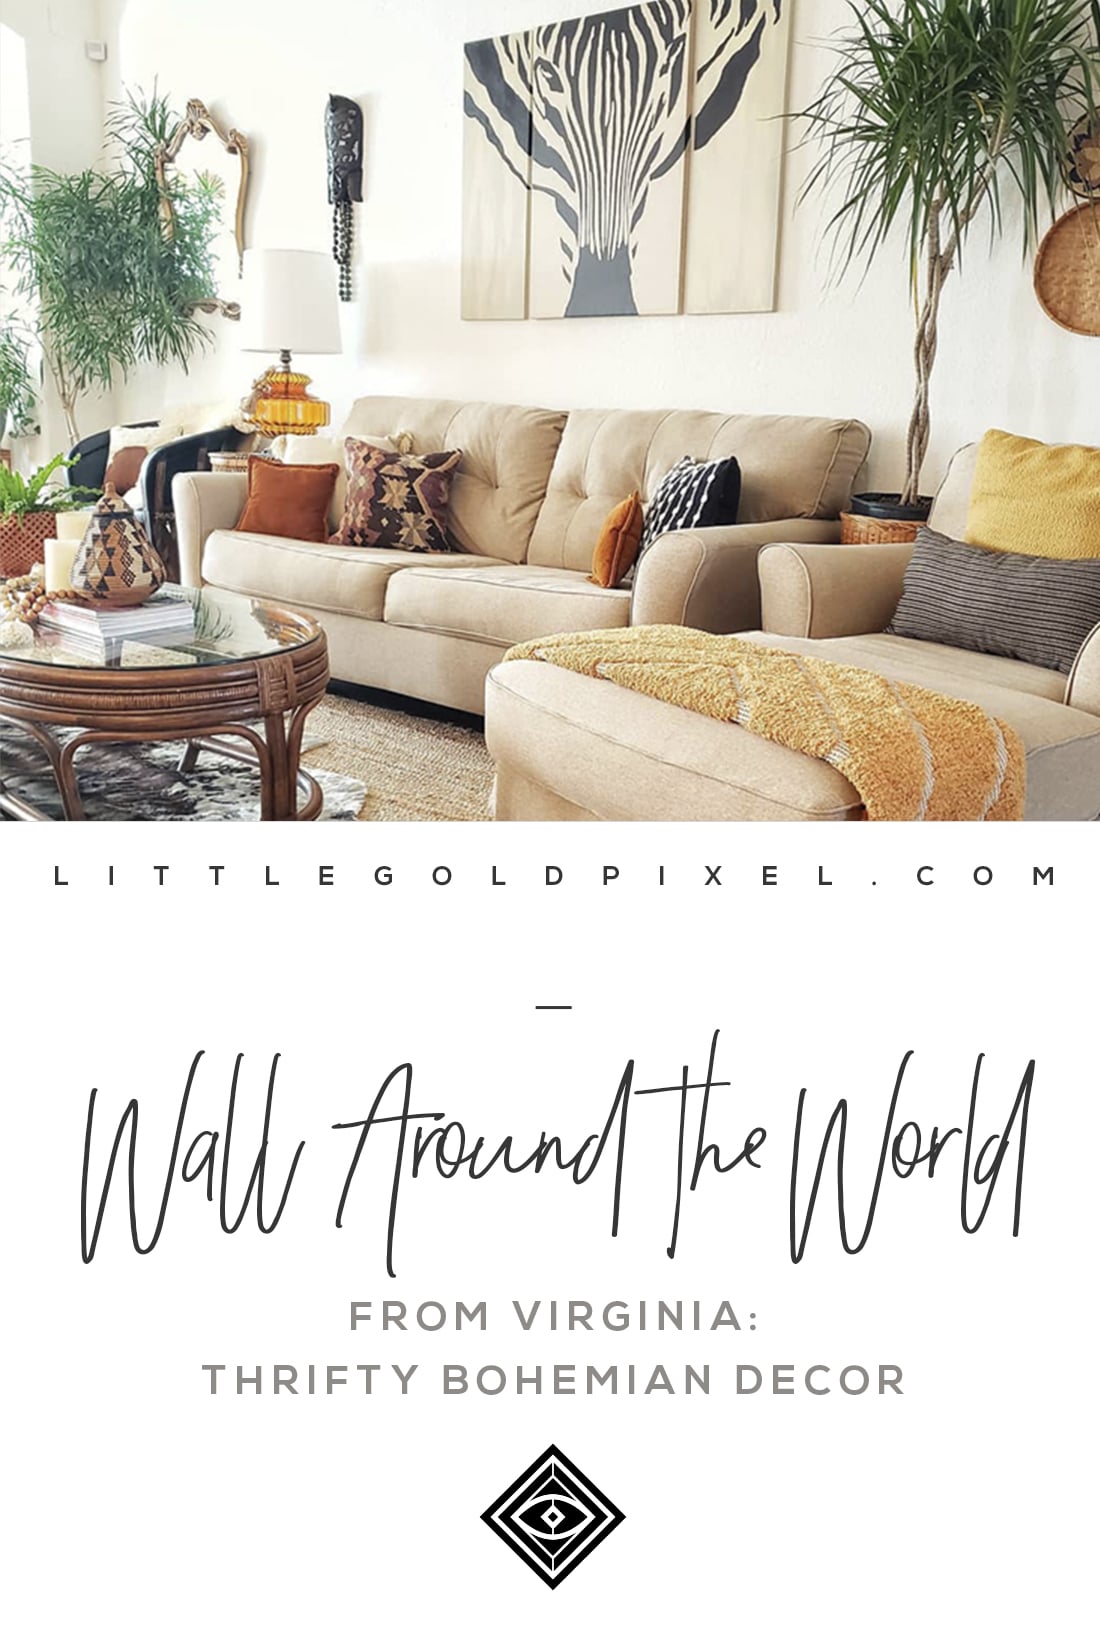 Thrifty Bohemian Gallery Walls • Wall Around the World • Little Gold Pixel • All photos © Tracey Hairston • Come inside Tracey's Virginia home and get the secrets of her thrifty bohemian gallery walls in the latest installment of Wall Around the World. #thrifty #bohemian #boho #decor #gallerywalls #gallerywallideas